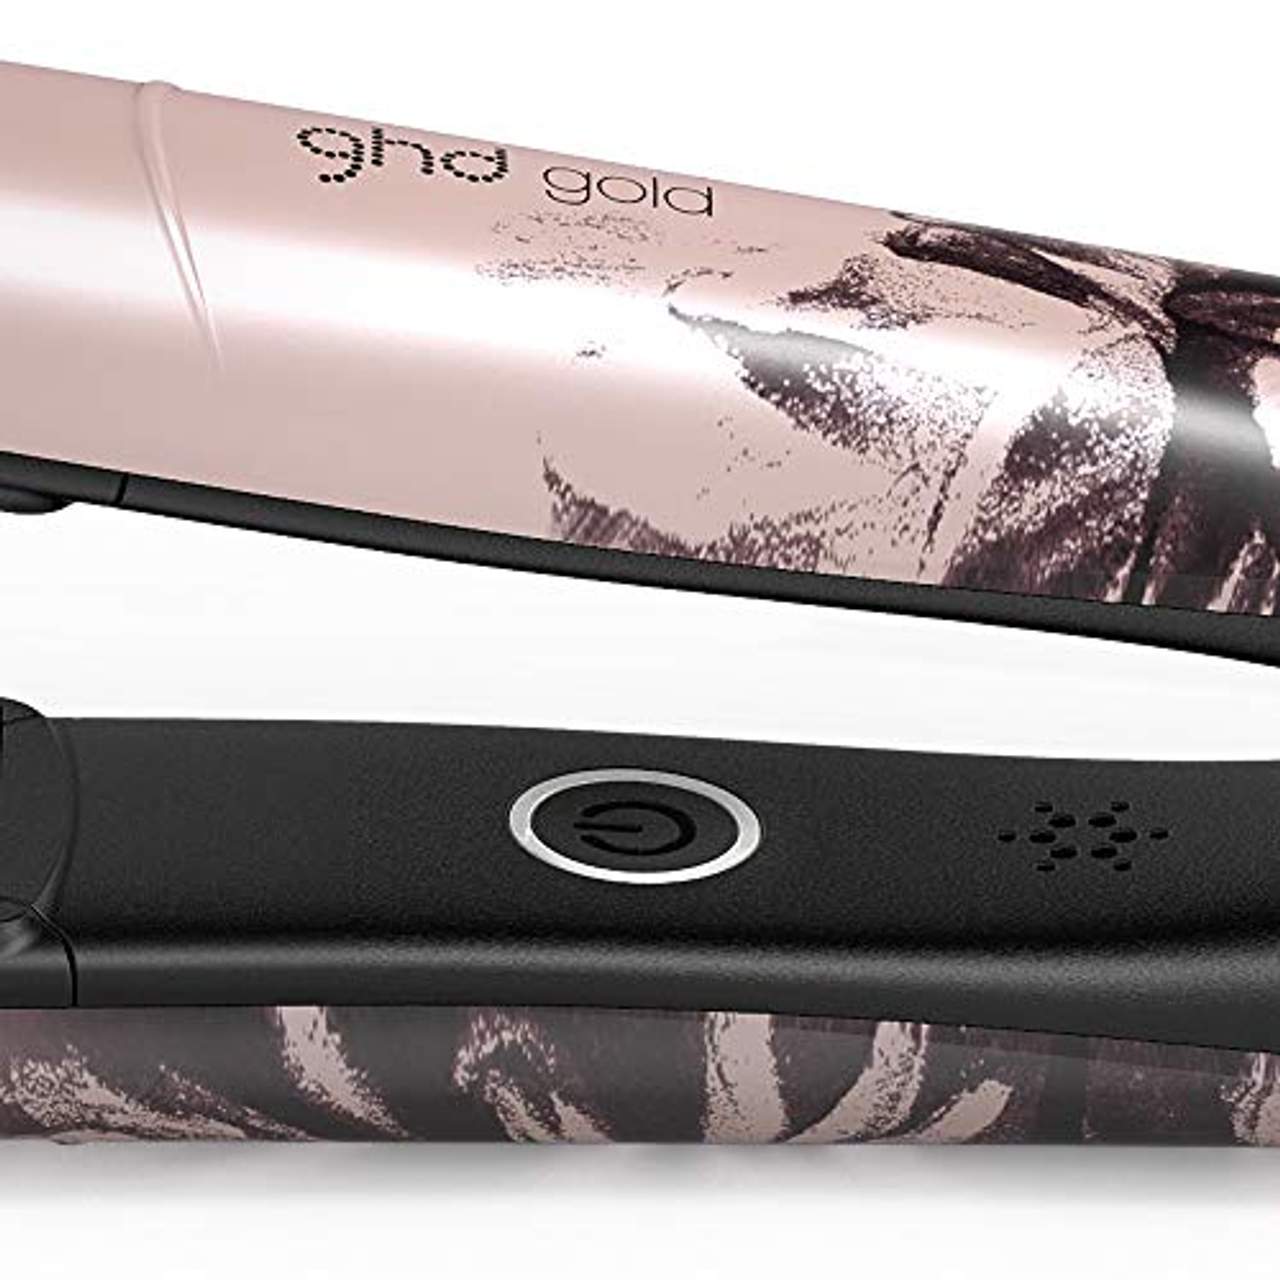 ghd gold ink on pink Styler